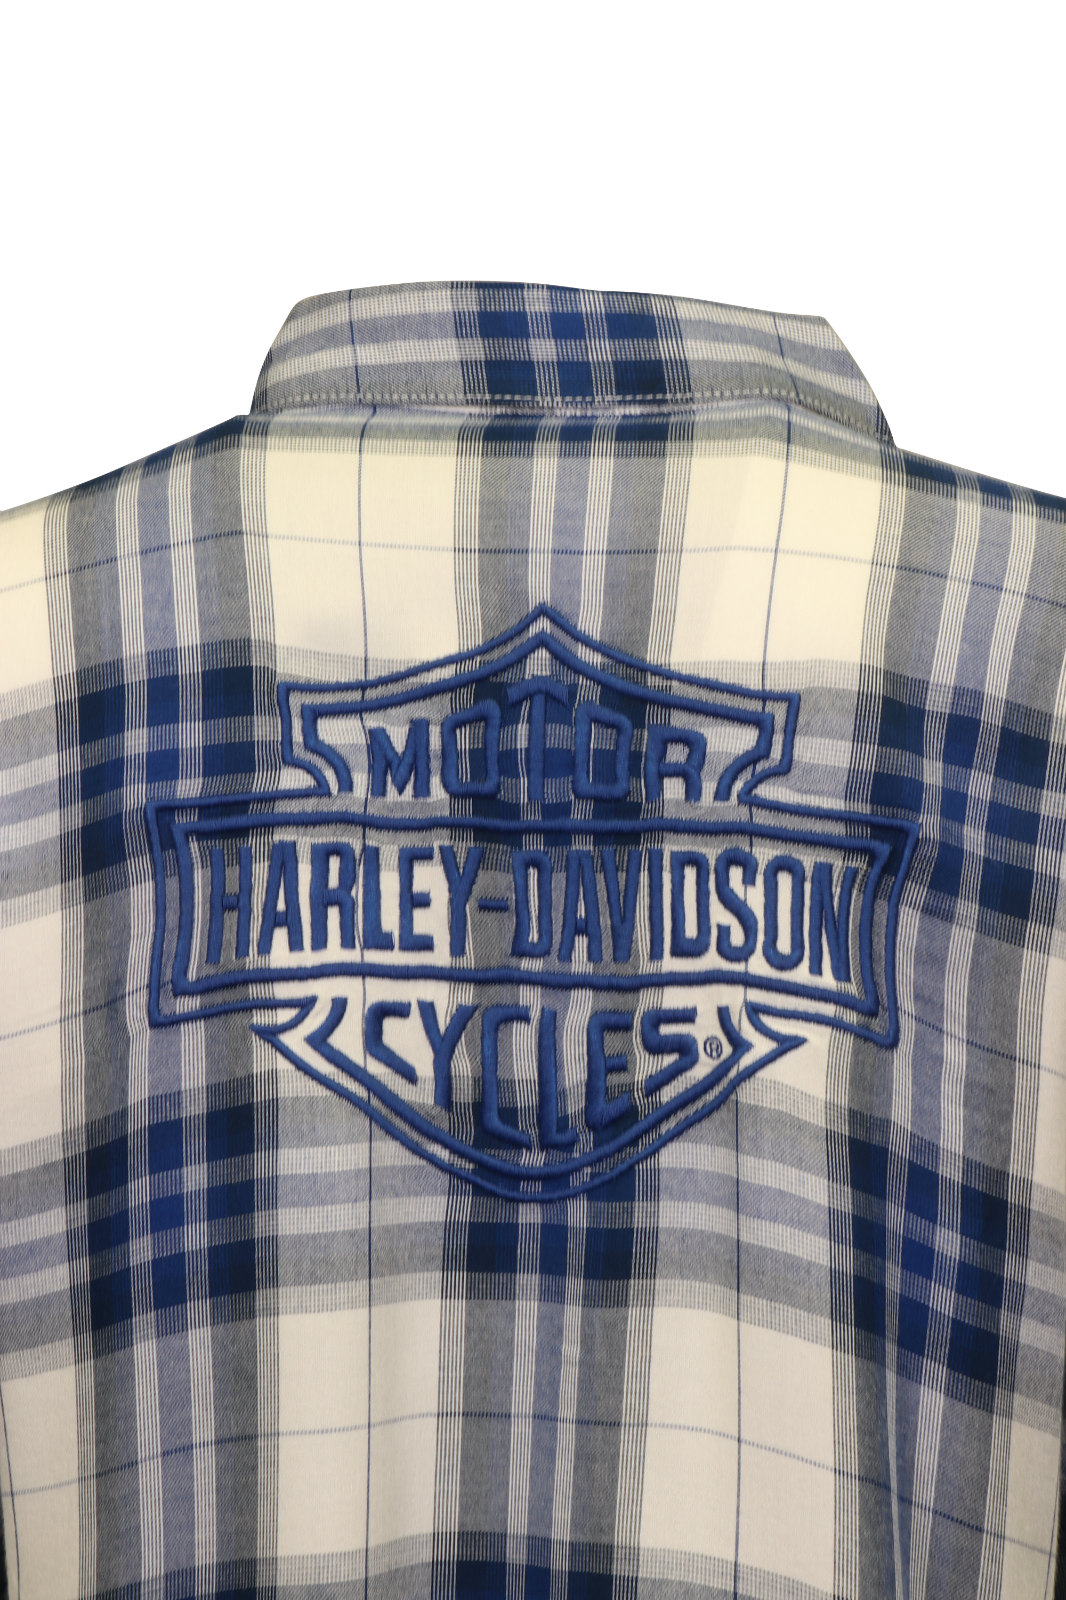 Harley-Davidson Women's Shirt Blue White Plaid Embroidered Text L/S Woven (S22)